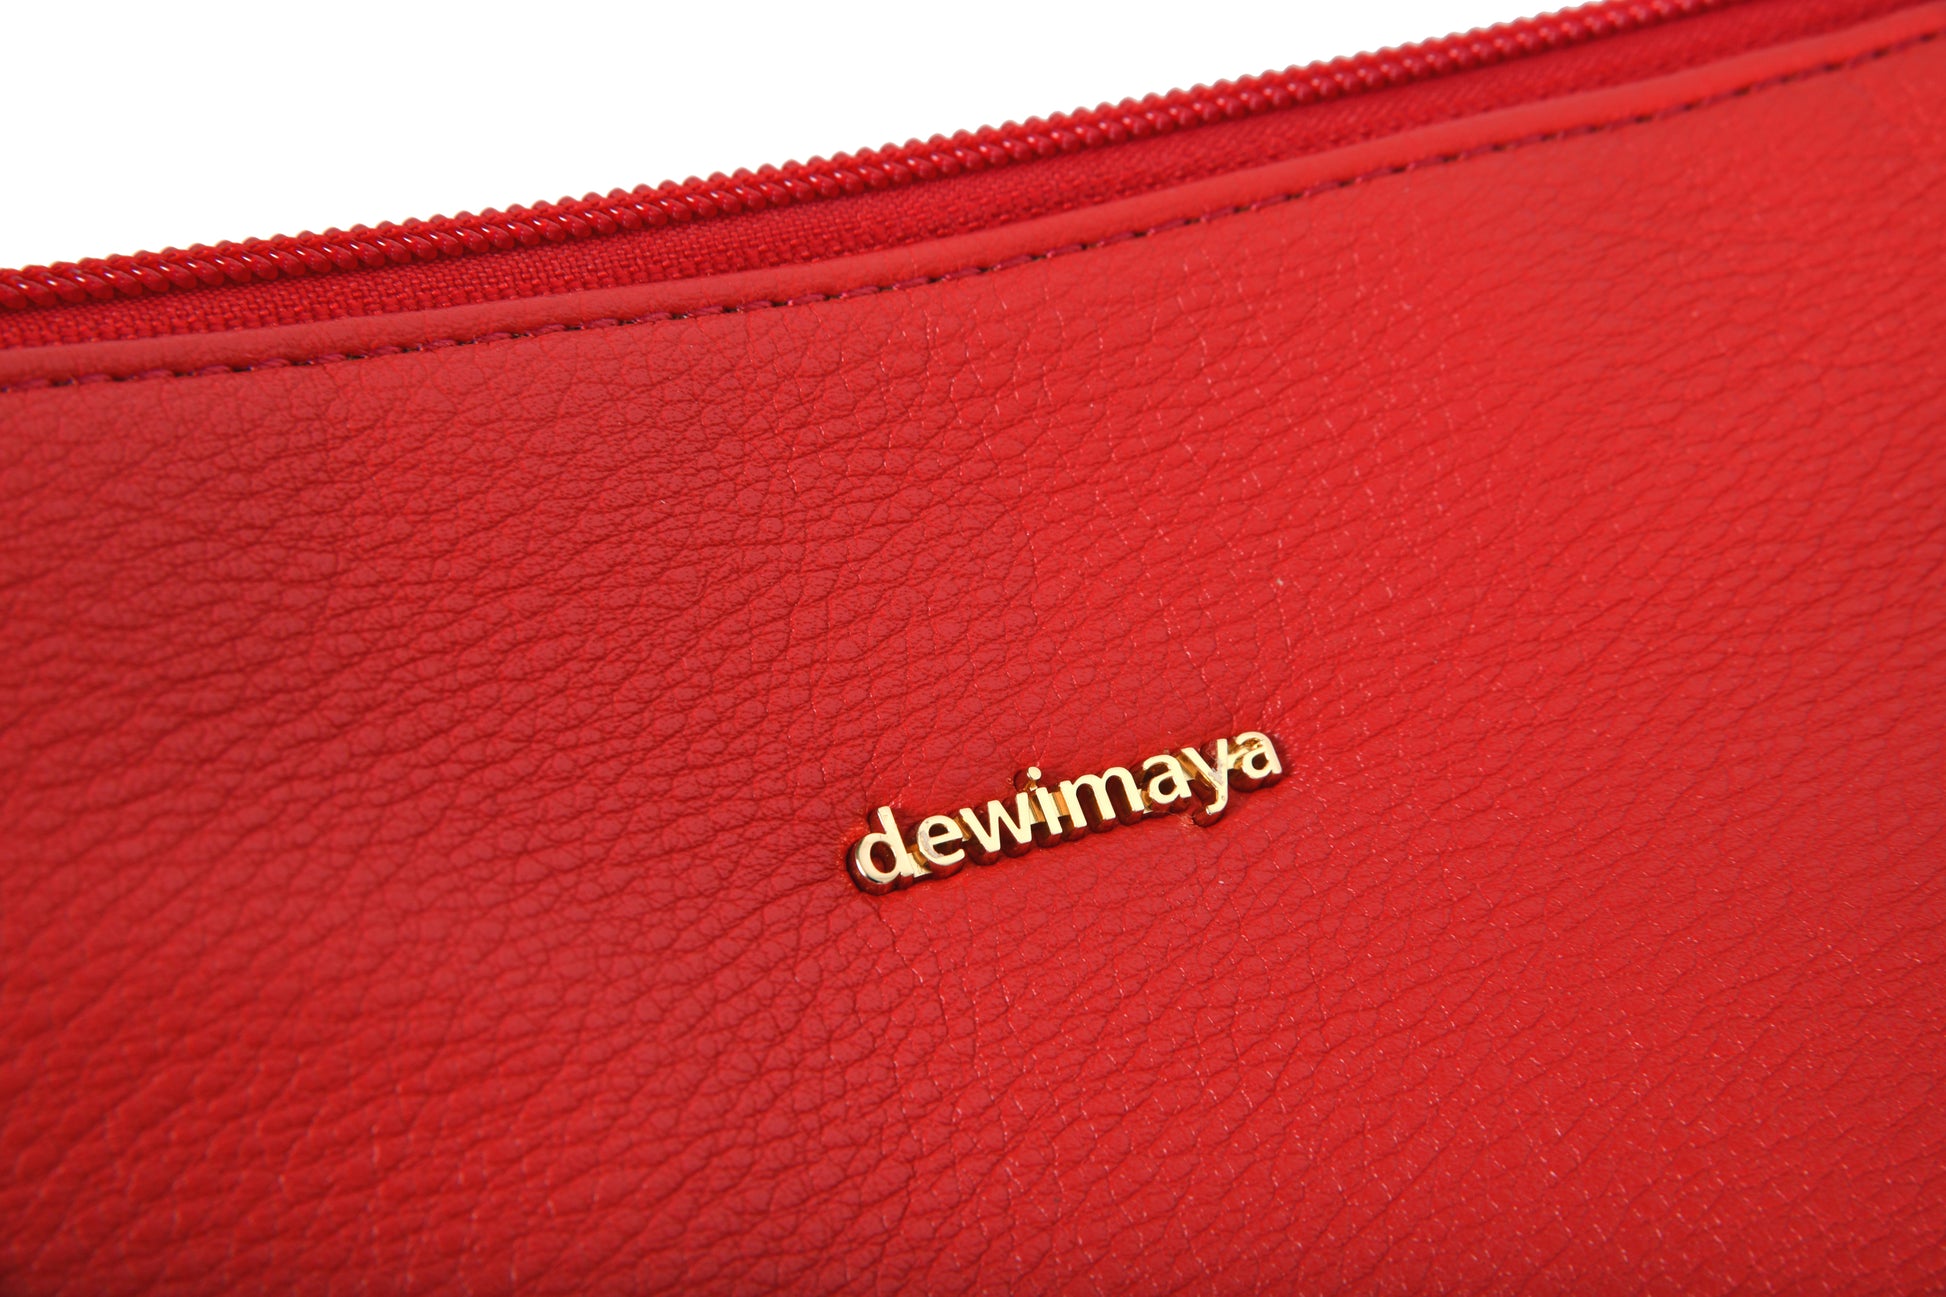 Liliana Red Pebble Grain Faux Leather Handbag Clutch Make up Pouch made by Dewi Maya gold logo available at the best boutique in Upstate South Carolina Spartanburg Greenville Dewi Maya Boutique